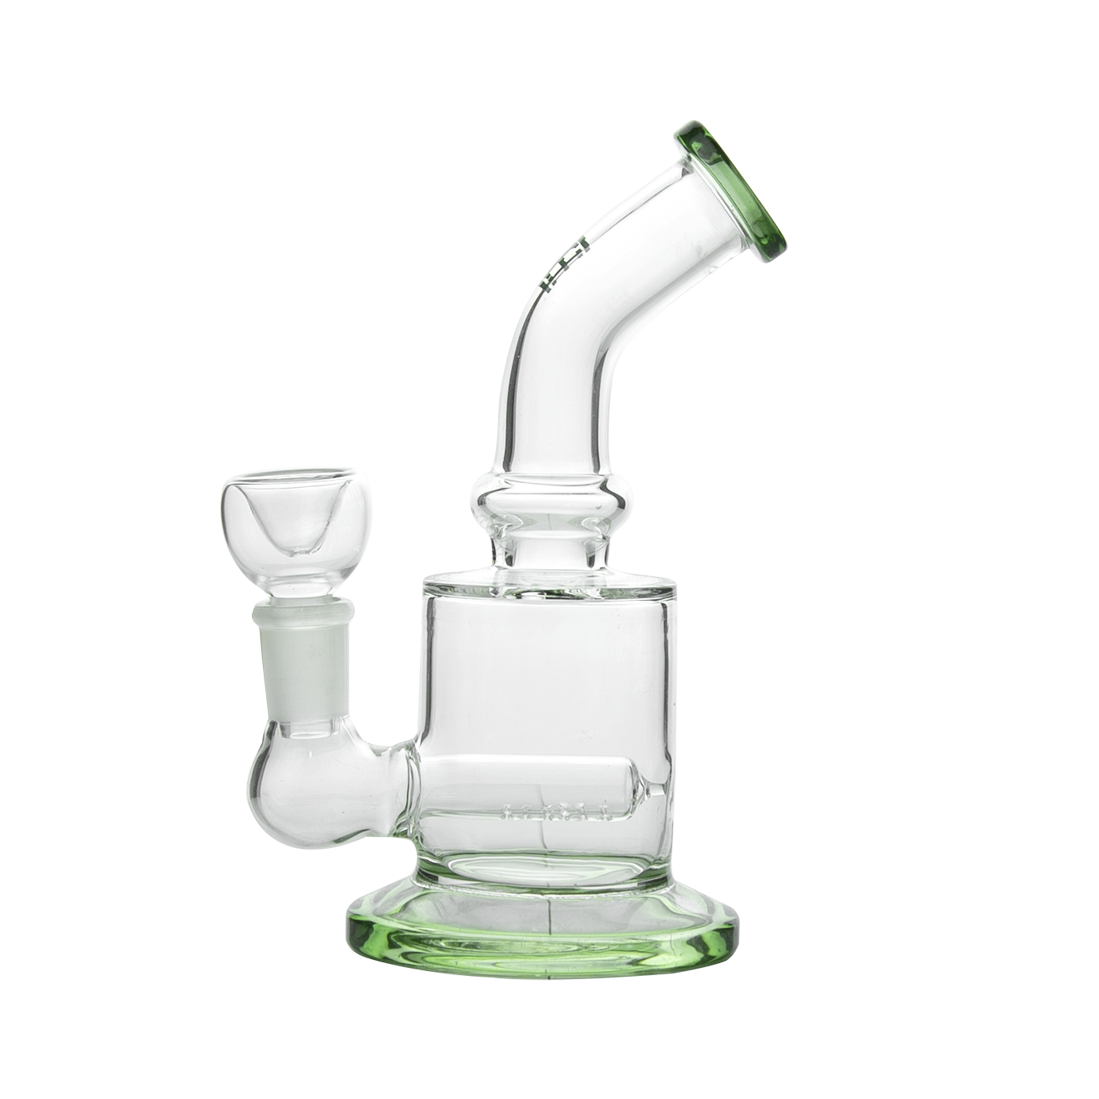 Hemper x CustomGrow420 Inline Perc Rig with bubble design, 6" height, and 14mm joint - Green Variant